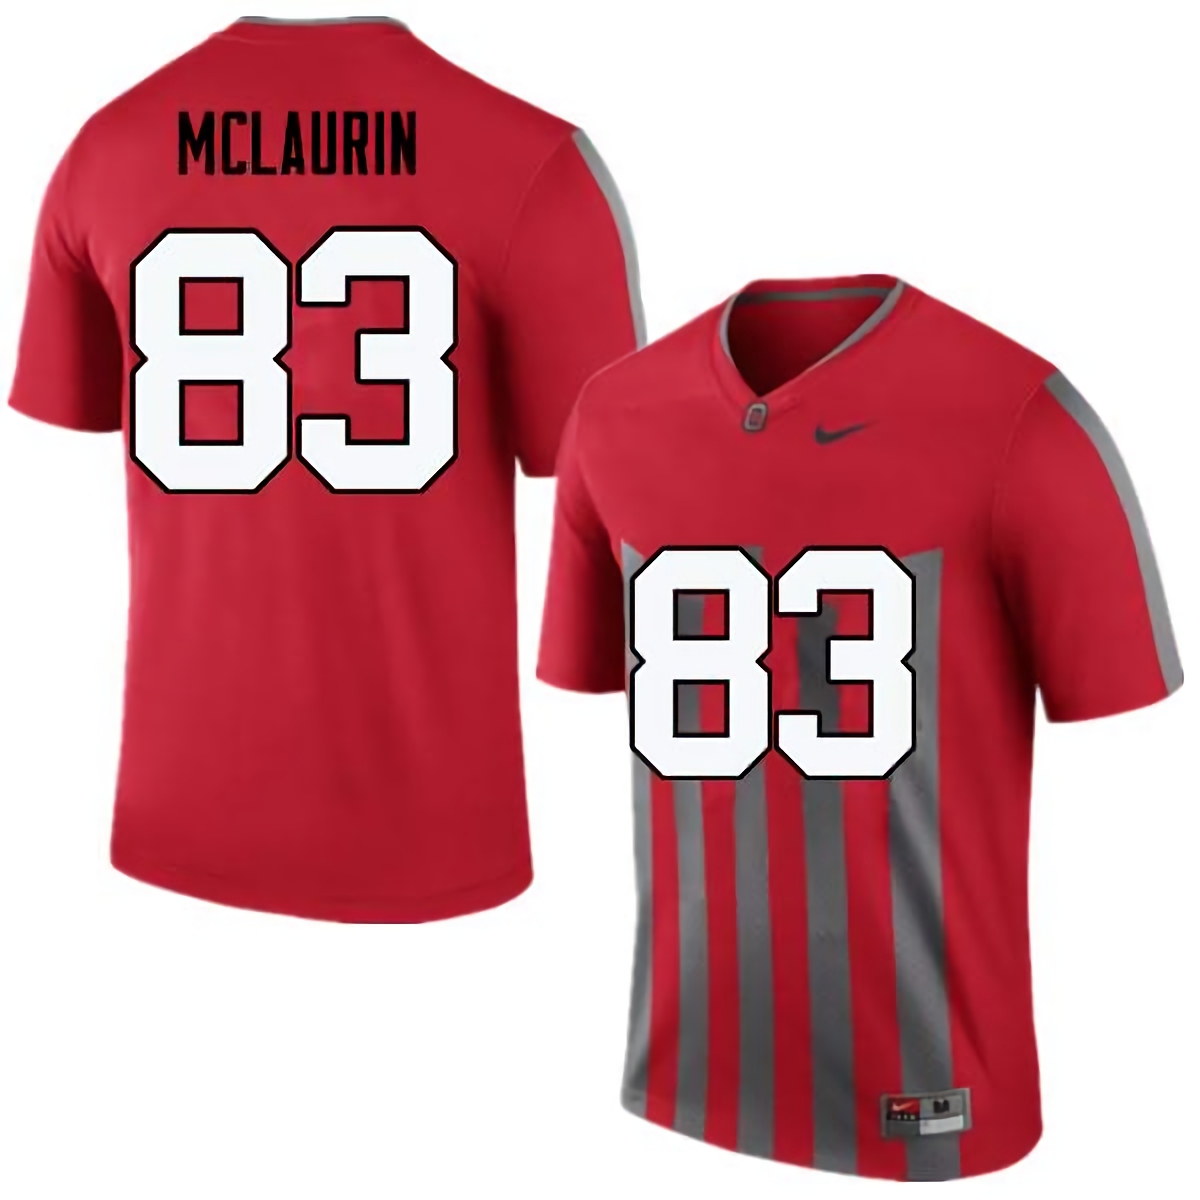 Terry McLaurin Ohio State Buckeyes Men's NCAA #83 Nike Throwback Red College Stitched Football Jersey HRZ2056NG